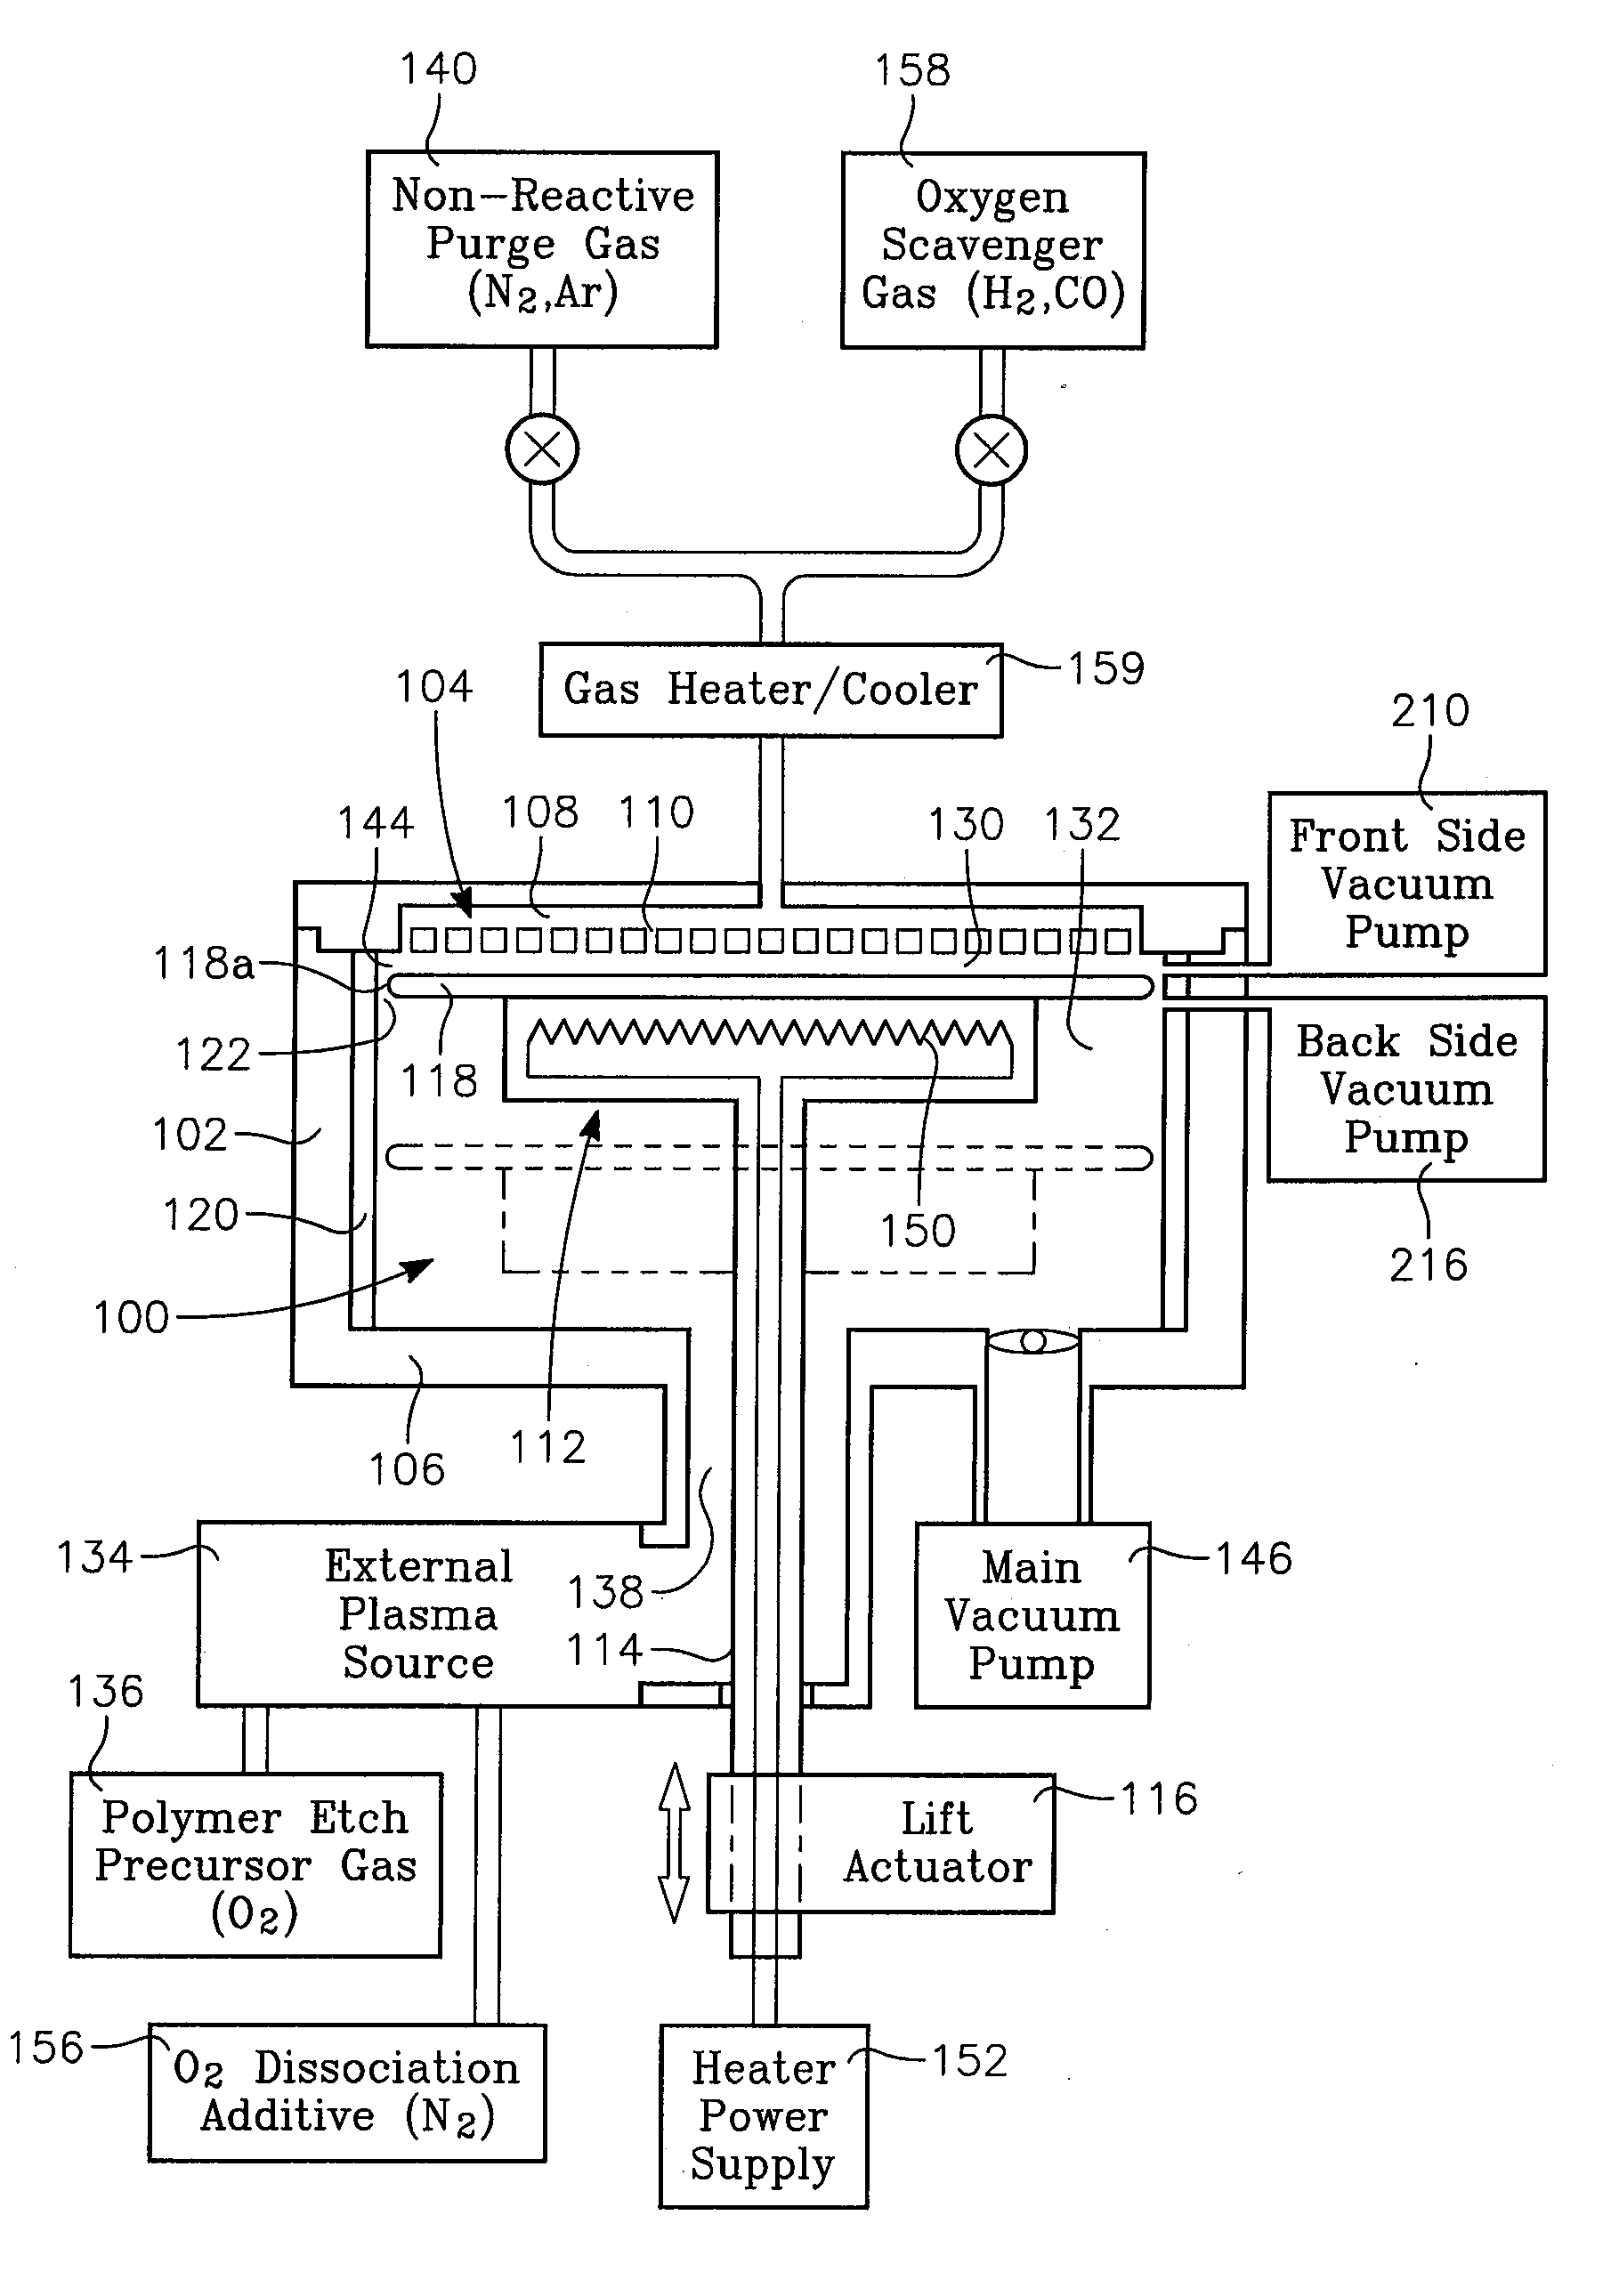 Temperature-switched process for wafer backside polymer removal and front side photoresist strip